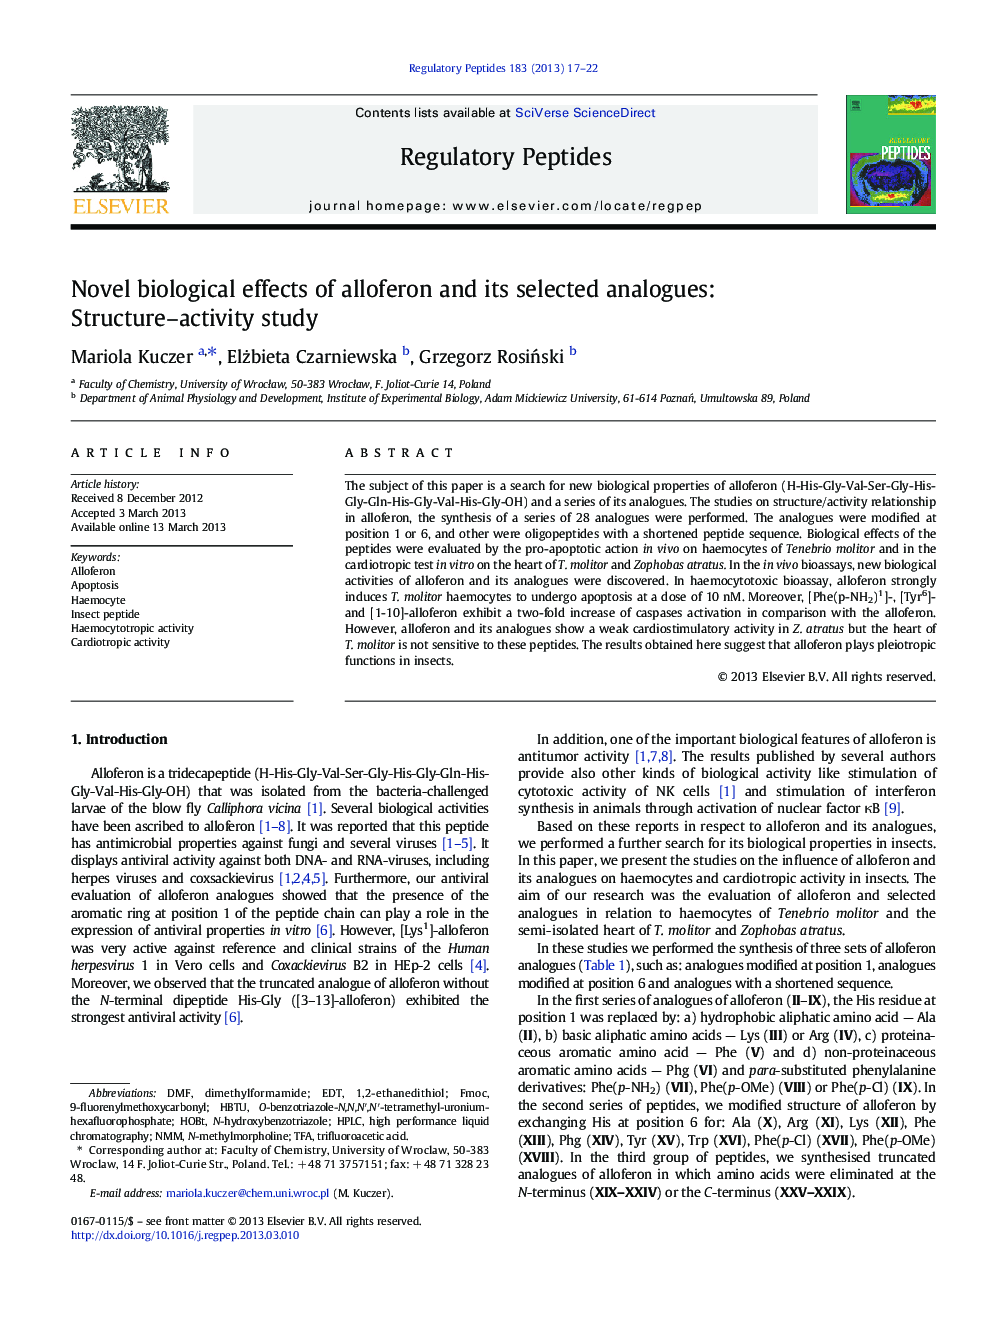 Novel biological effects of alloferon and its selected analogues: Structure–activity study